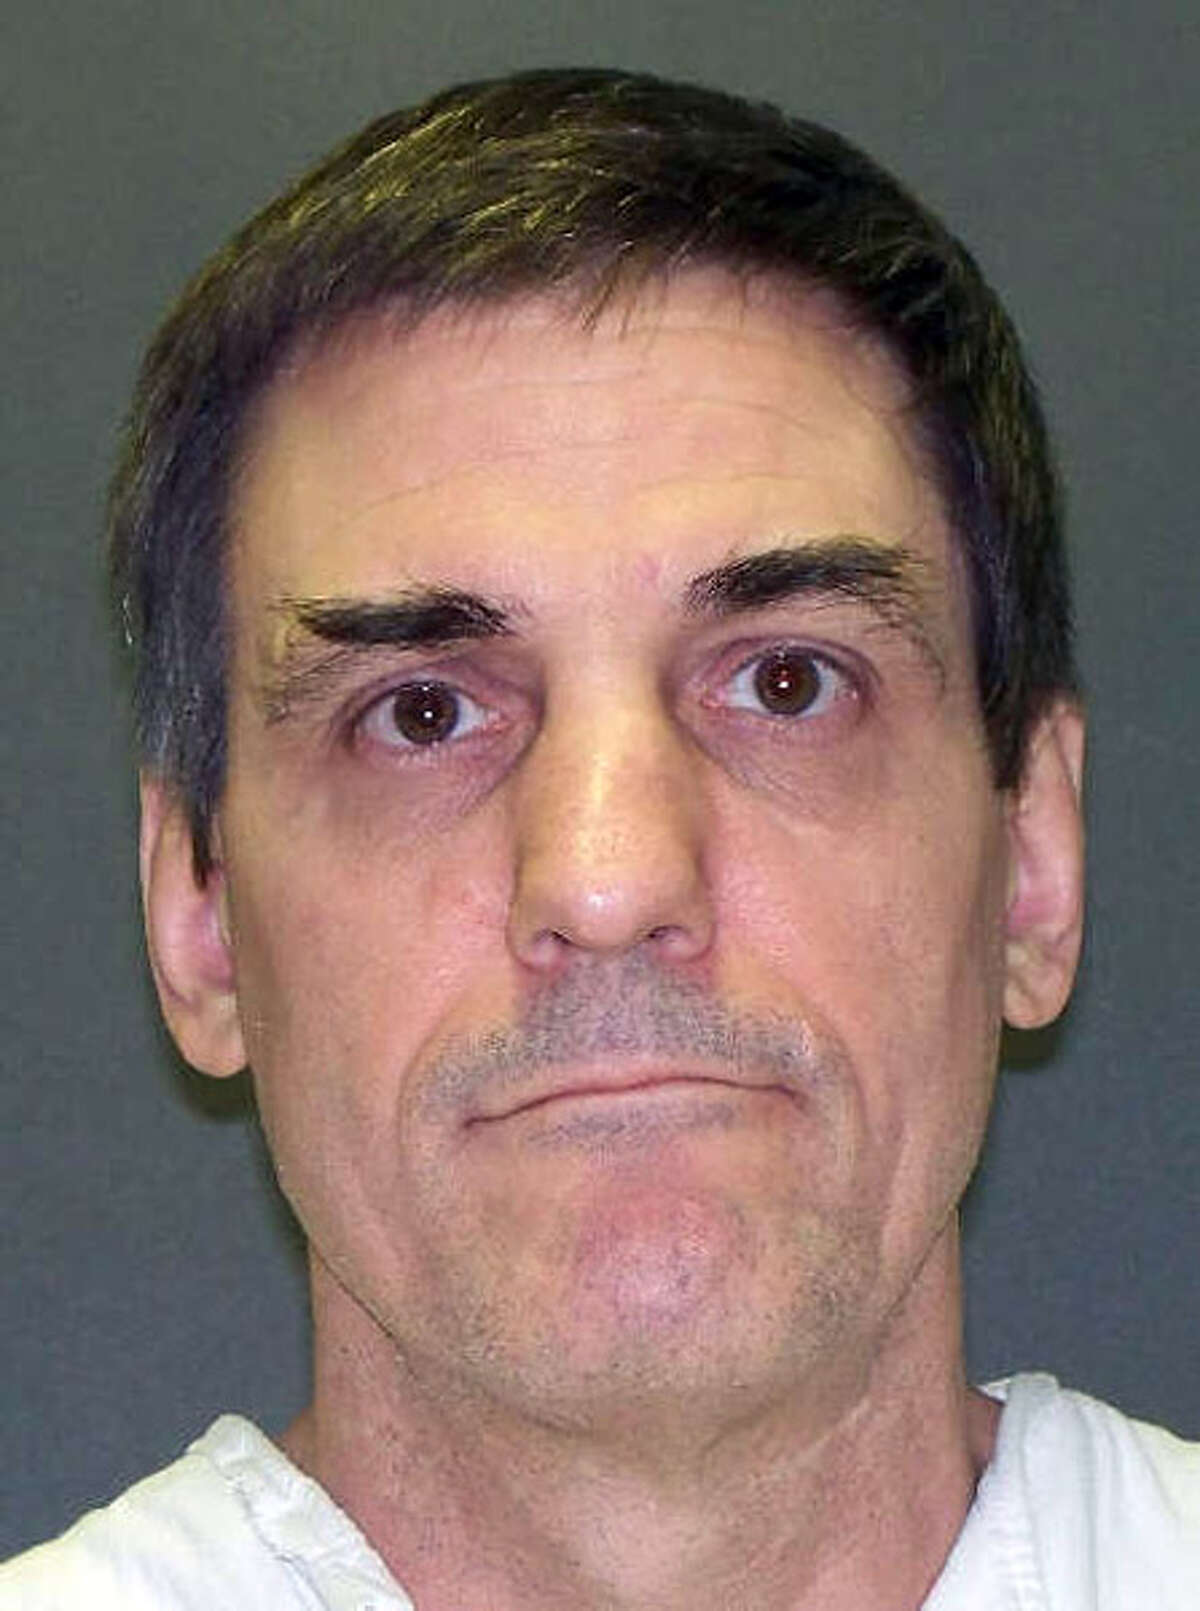 This handout photo provided by the Texas Department of Criminal Justice shows Scott Panetti. The Texas death row inmate whose attorneys contend is so delusional he canât understand why he was convicted and condemned has received a Dec. 3, 2014 execution date. (AP Photo/Texas Department of Criminal Justice)